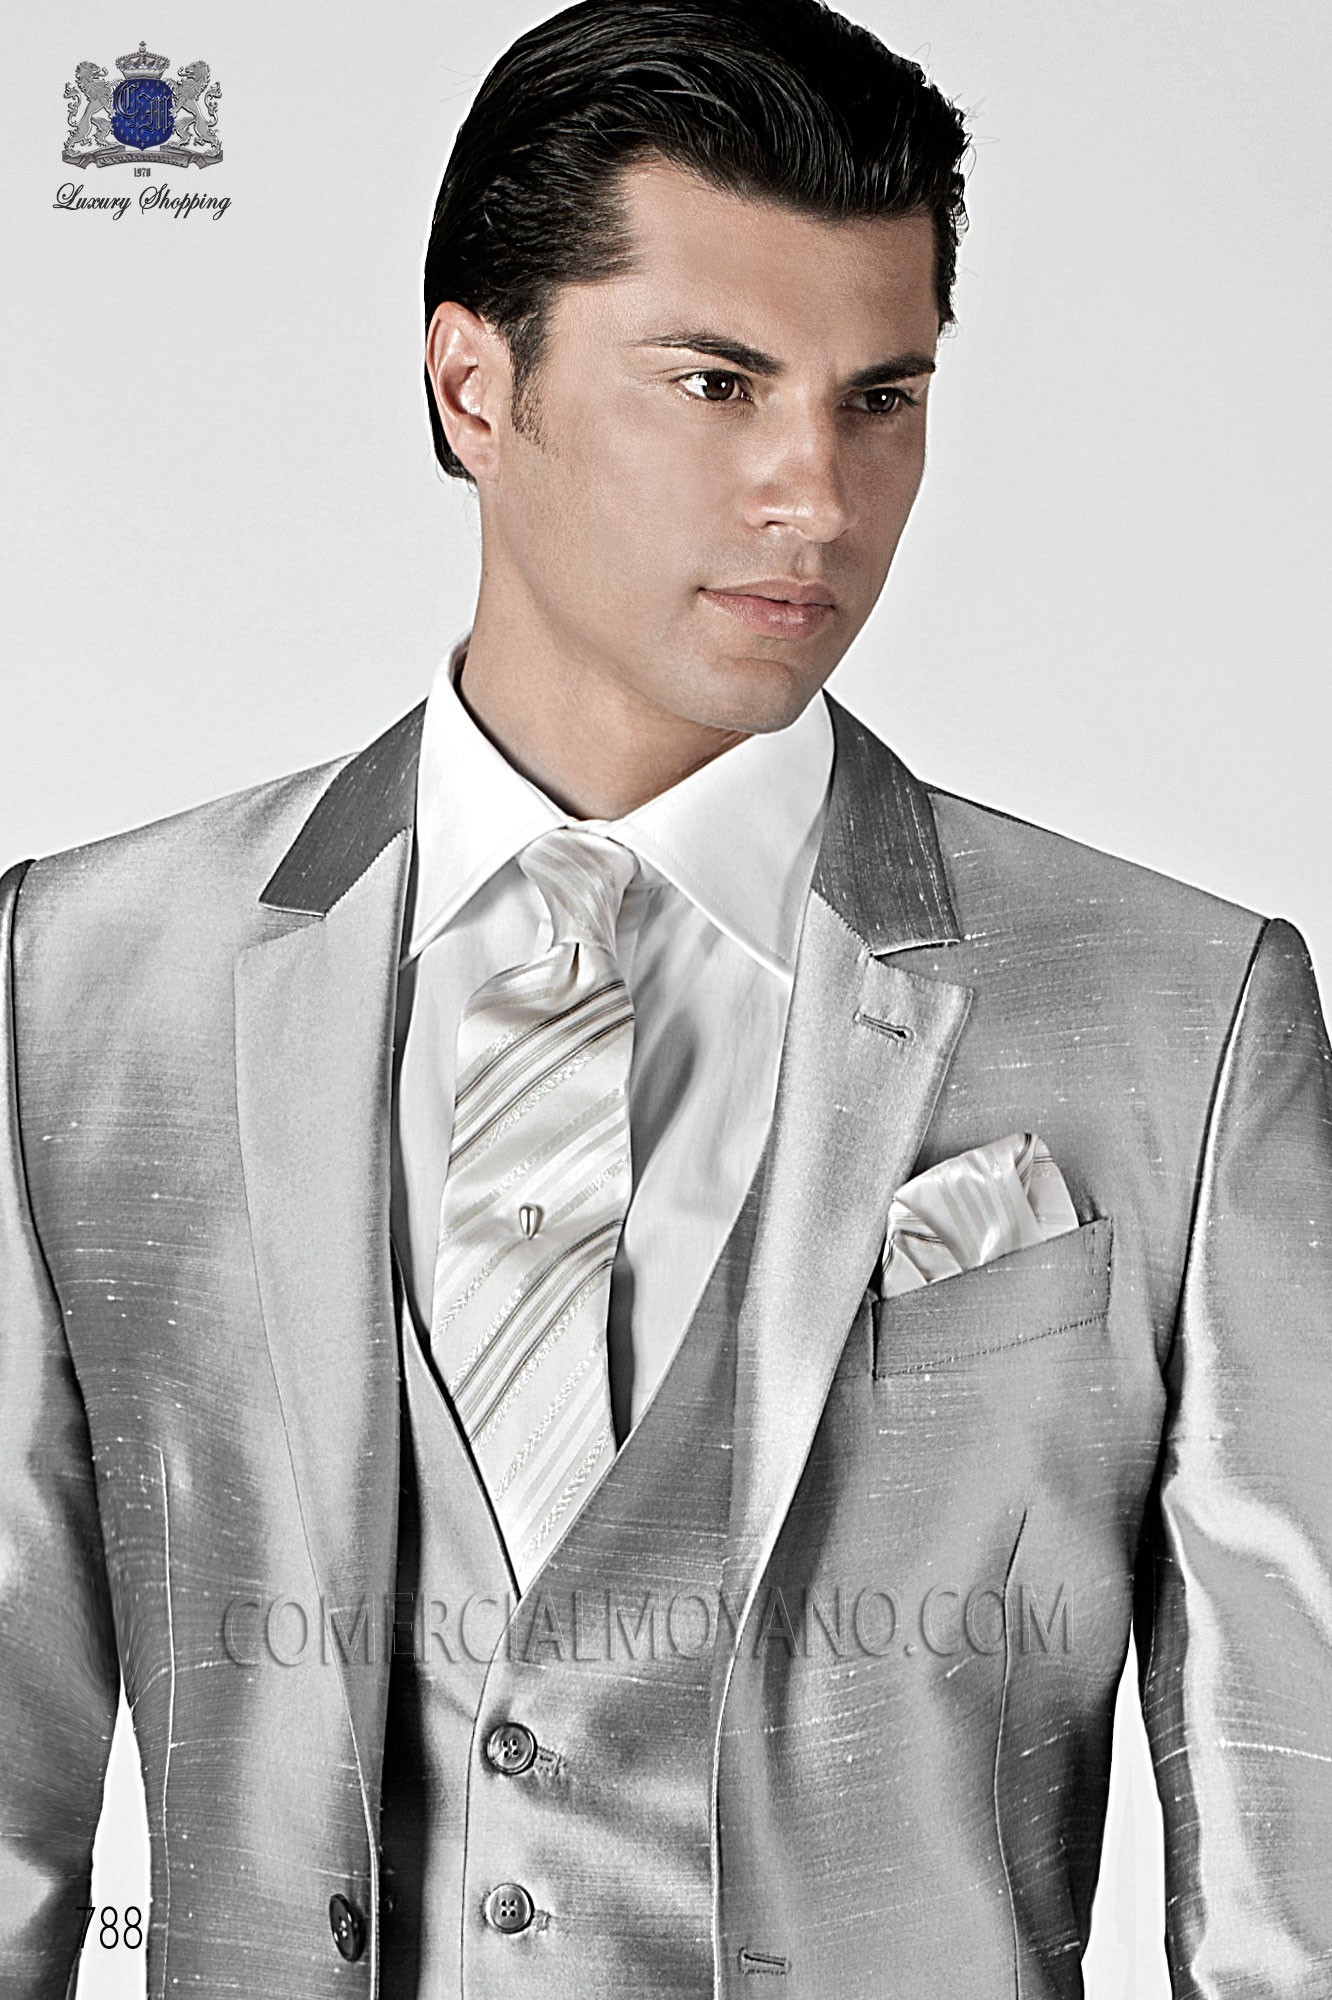 Hipster pearl gray men wedding suit, model: 788 Mario Moyano Hipster Collection